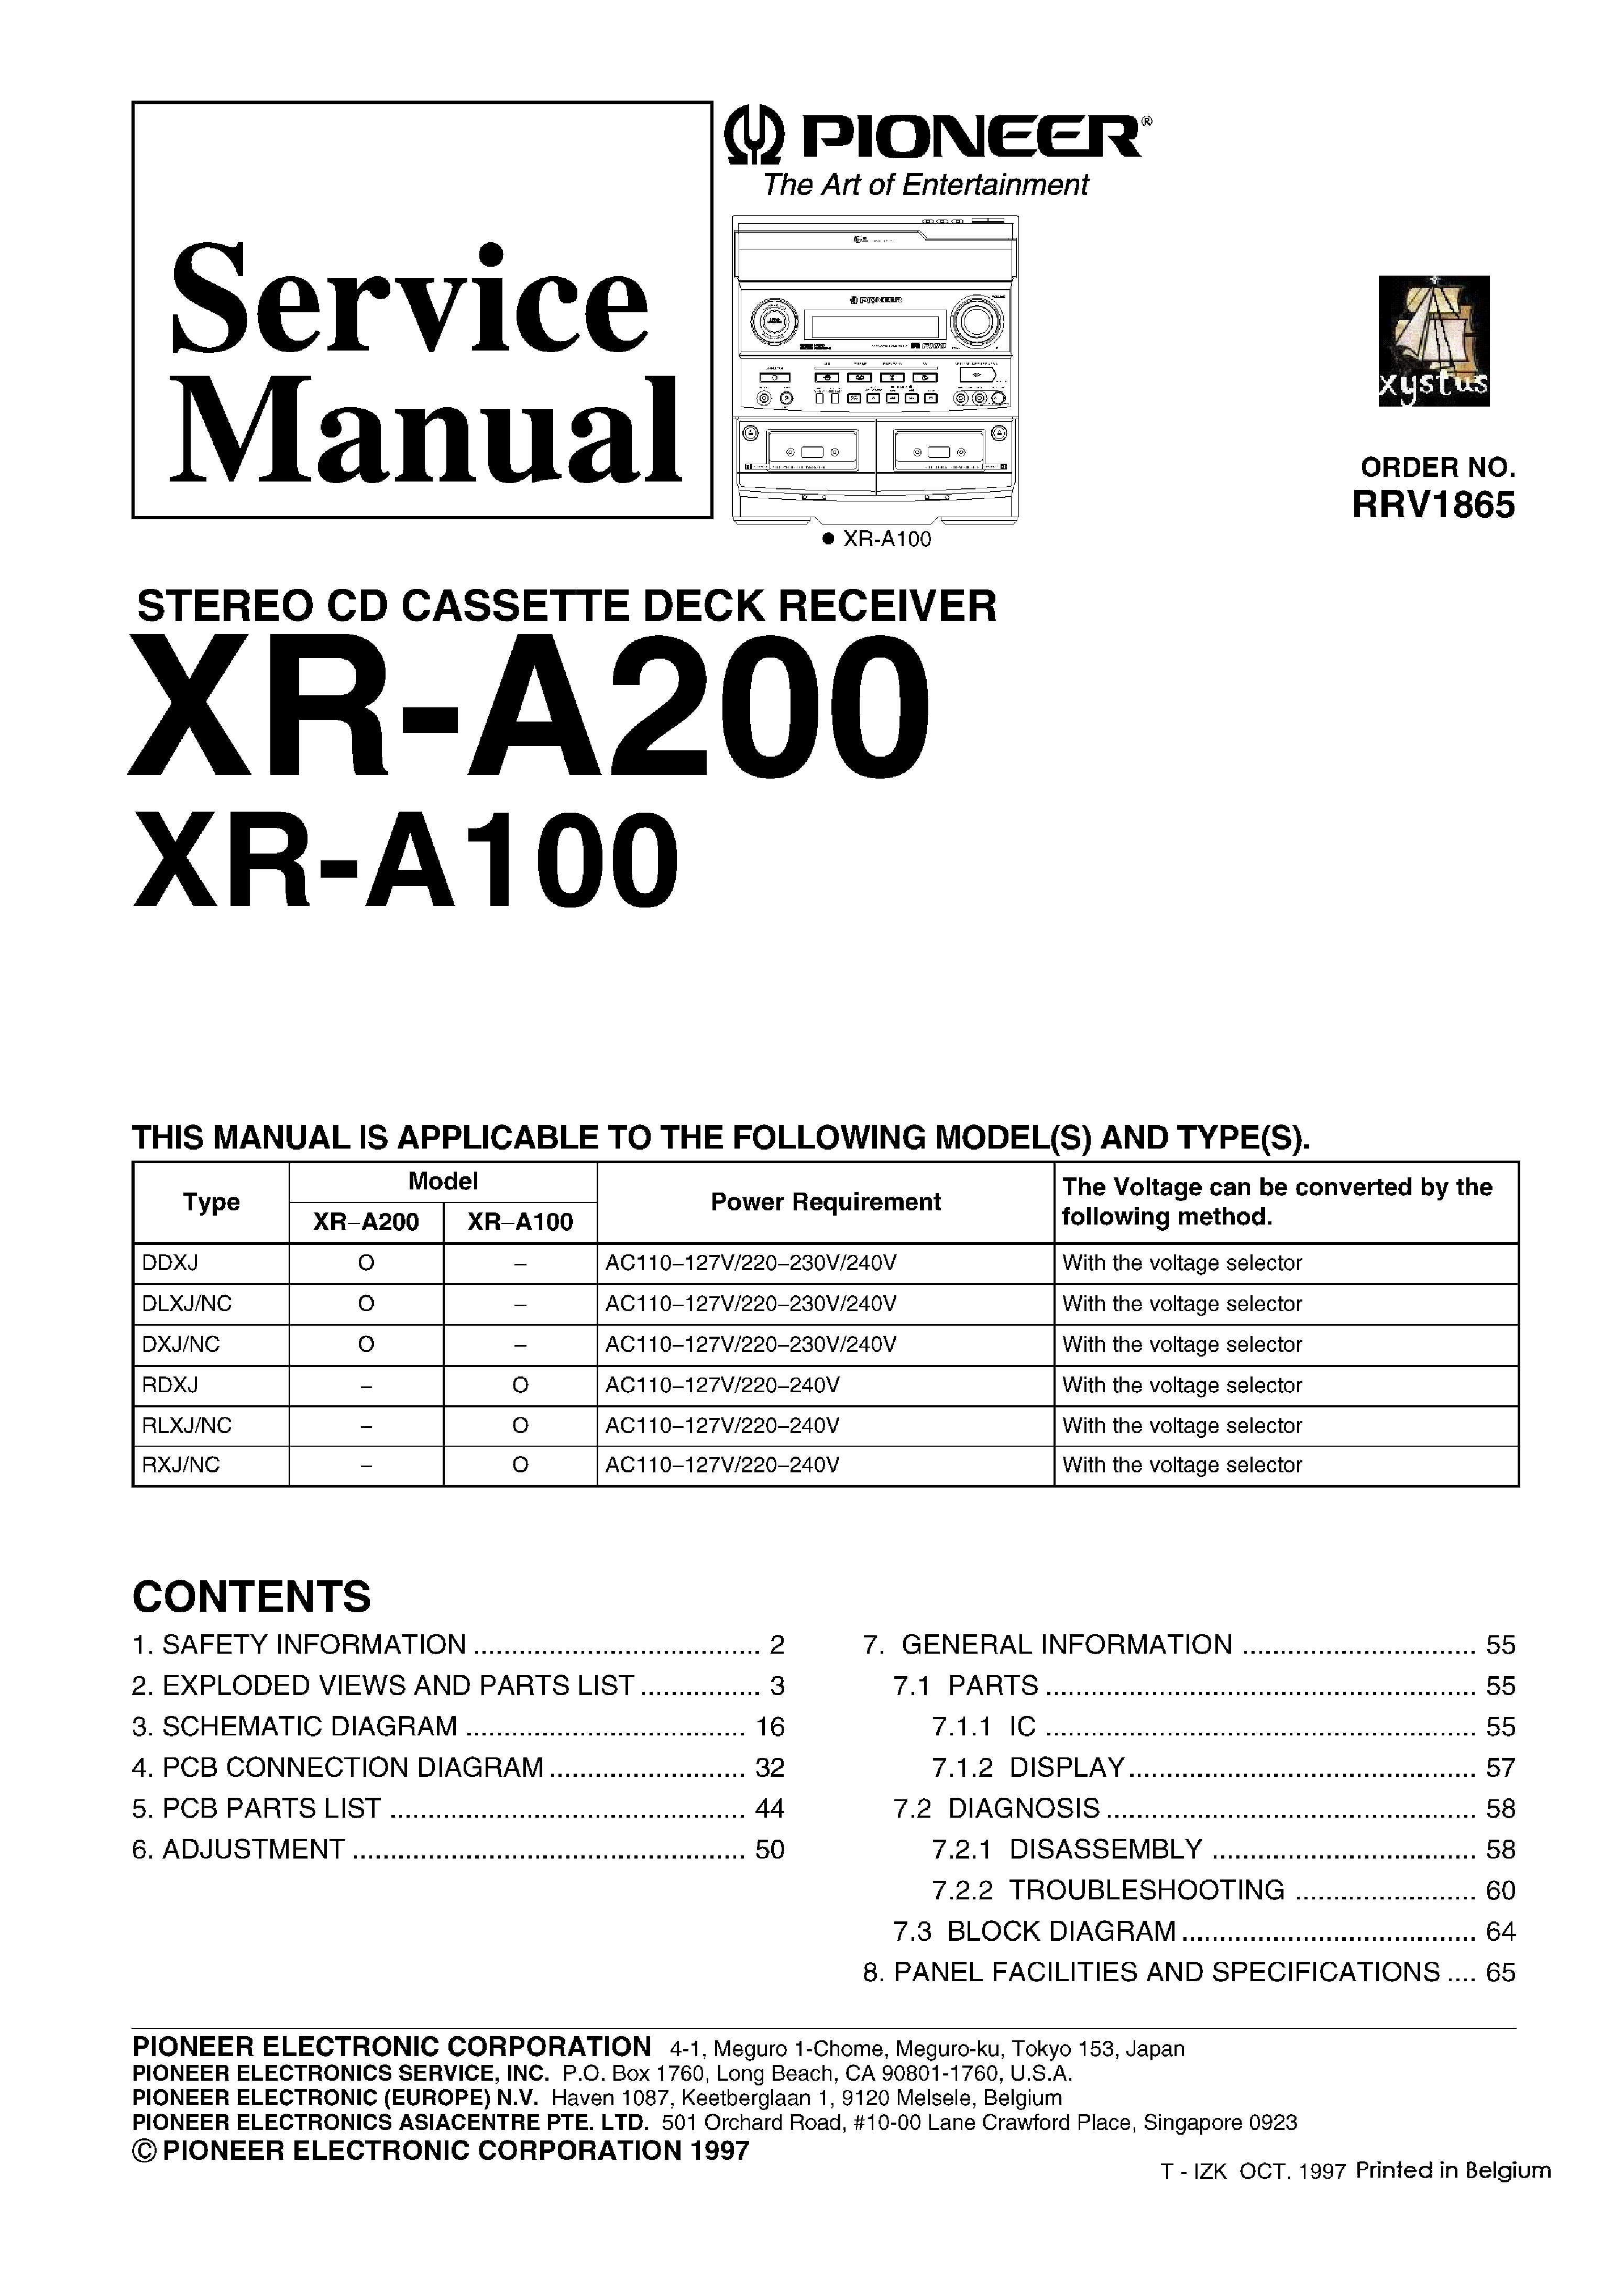 PIONEER XR-A100 A200 service manual (1st page)